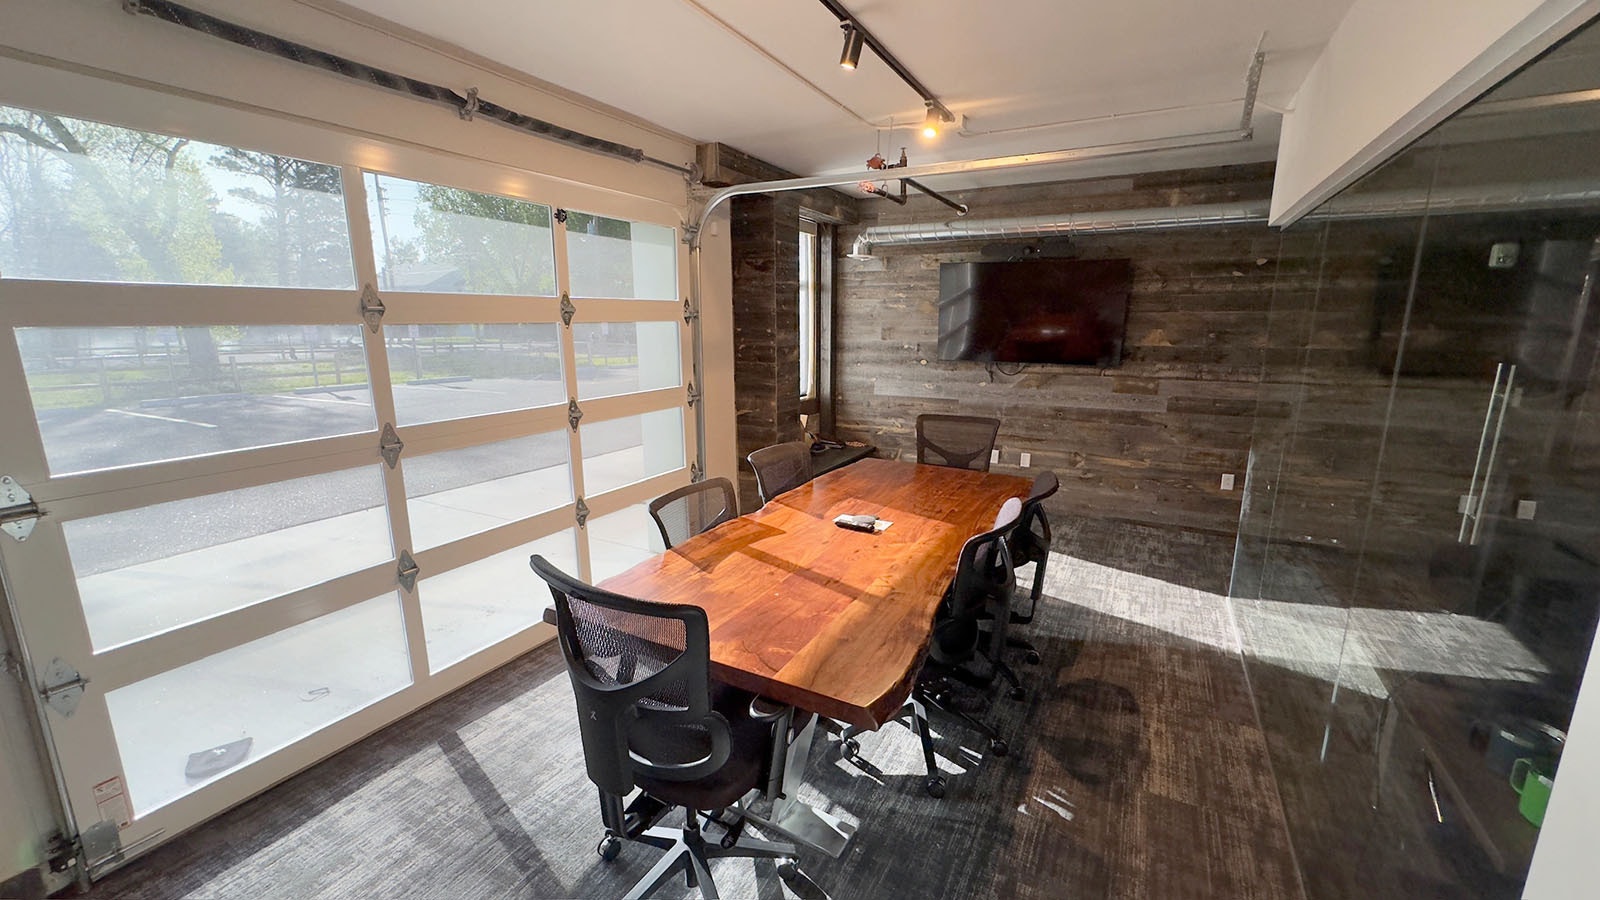 The back conference room features a beautiful slab table and a large screen to Zoom morning news budget meetings. The garage door can be opened when the weather's nice.